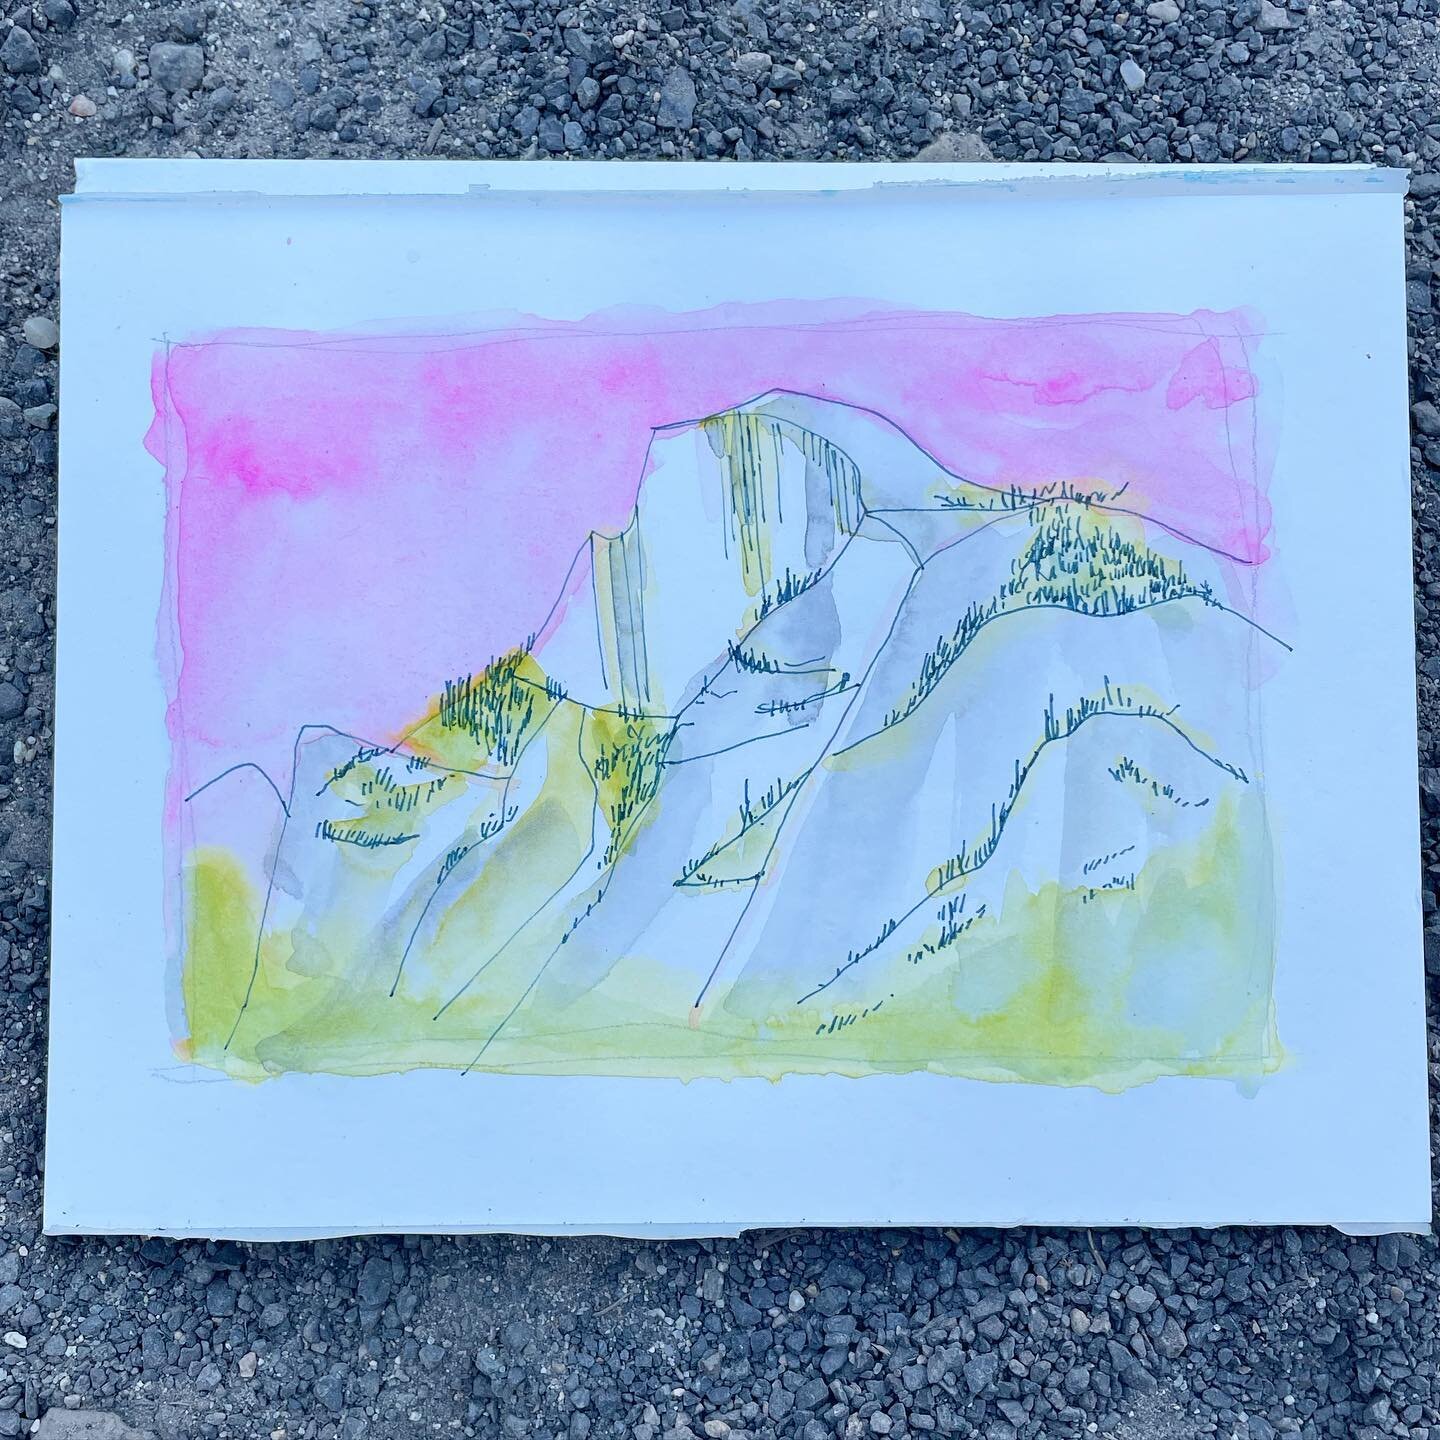 Painted #halfdome in the pre-sunset light before cooking up some tastybites for my last night in #yosemite. I learned a lot in my @yosemiteconservancy &ldquo;painting the peaks&rdquo; watercolor workshop with @drawntohighplaces, including how to let 